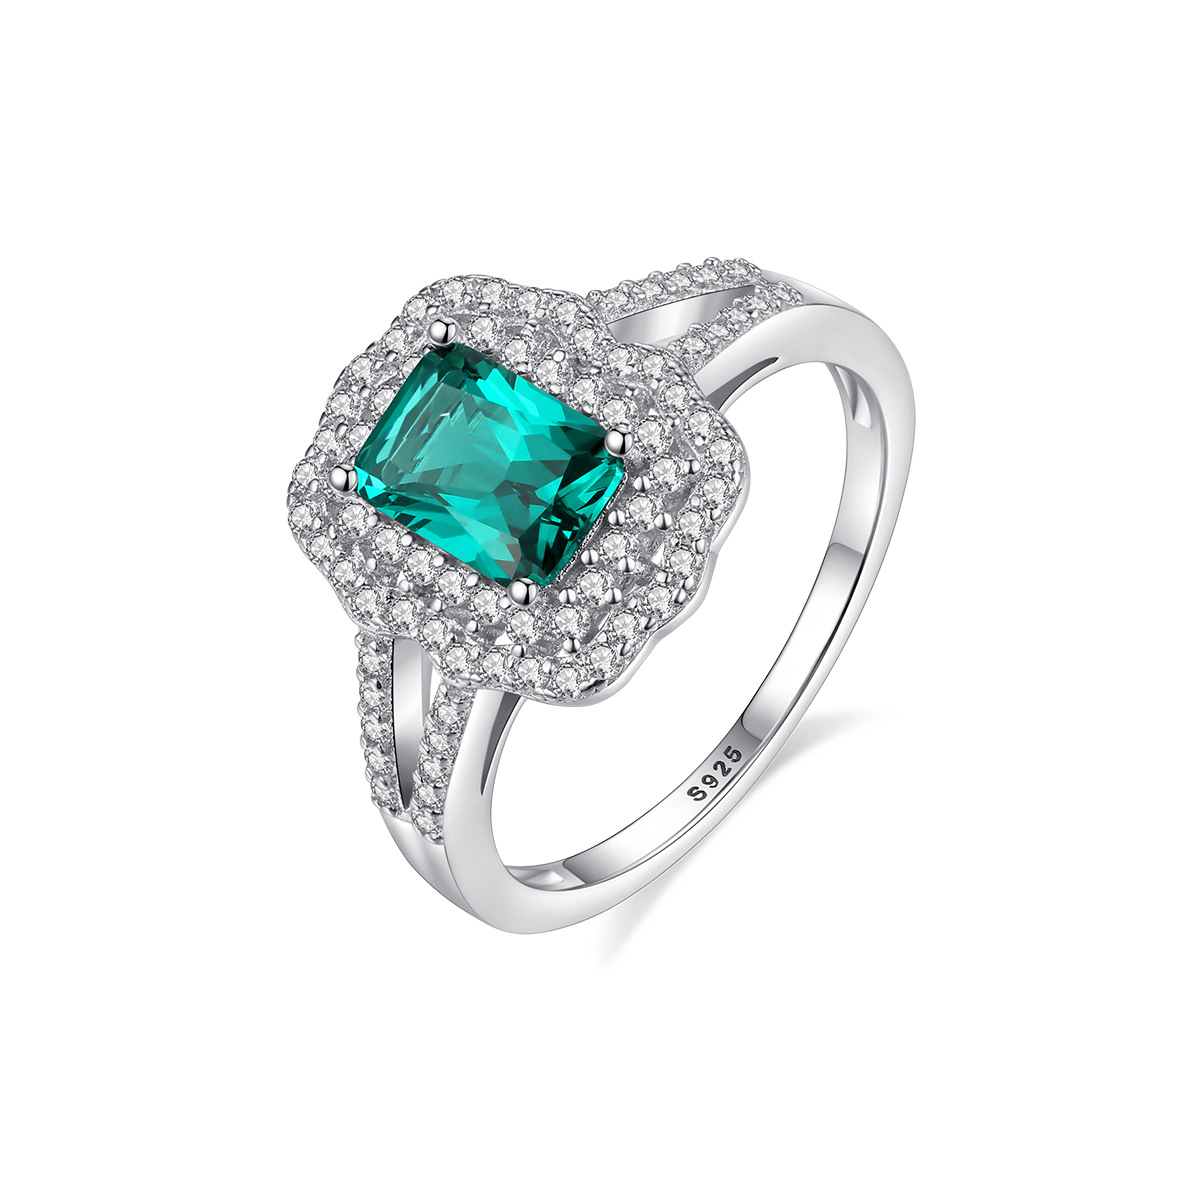 3A Cz Green Emerald Sterling Silver Ring